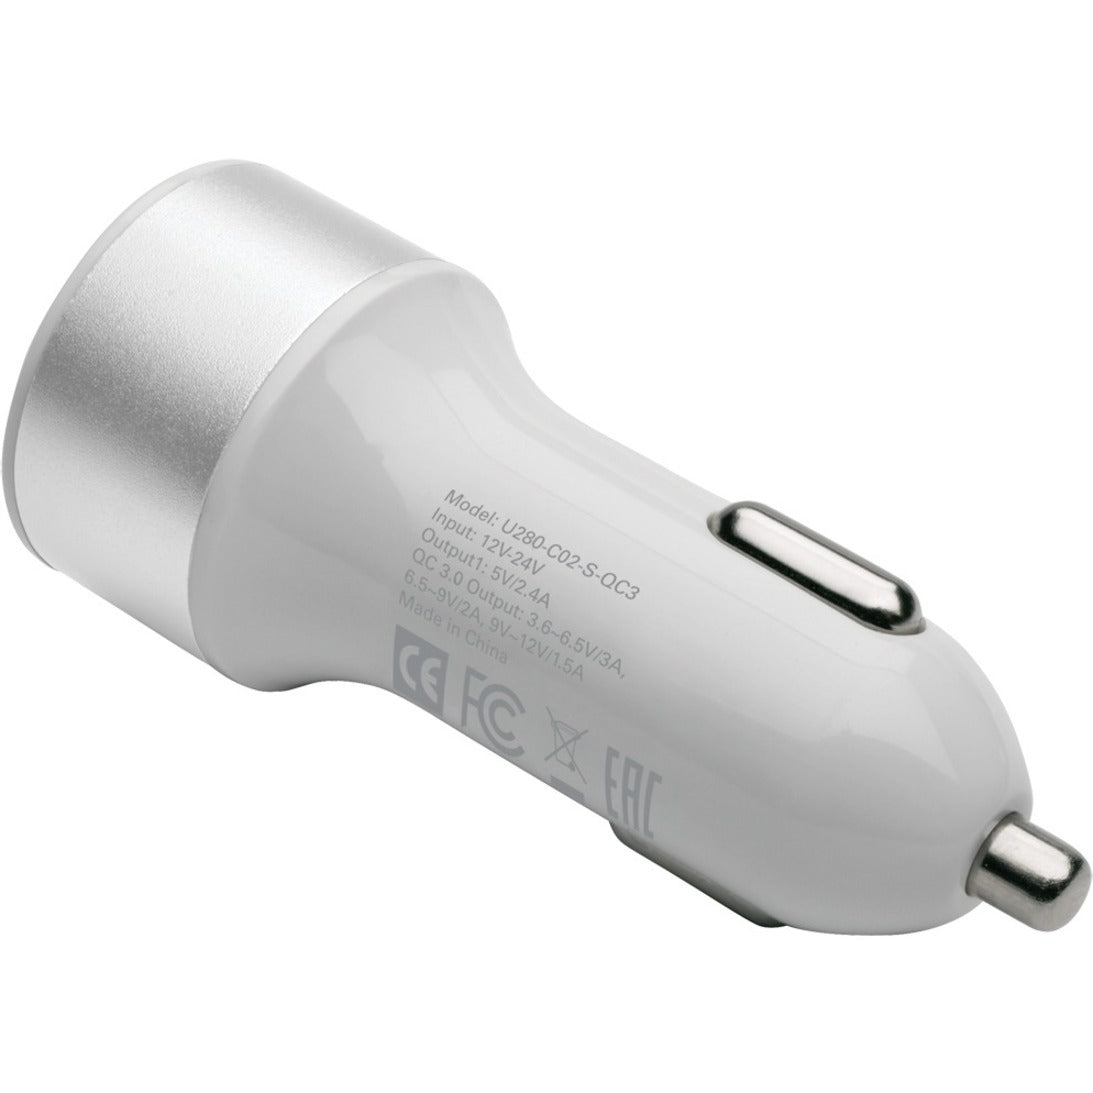 Tripp Lite U280-C02-S-QC3 Dual-Port USB Car Charger, Qualcomm Quick Charge, for Tablets and Cell Phones